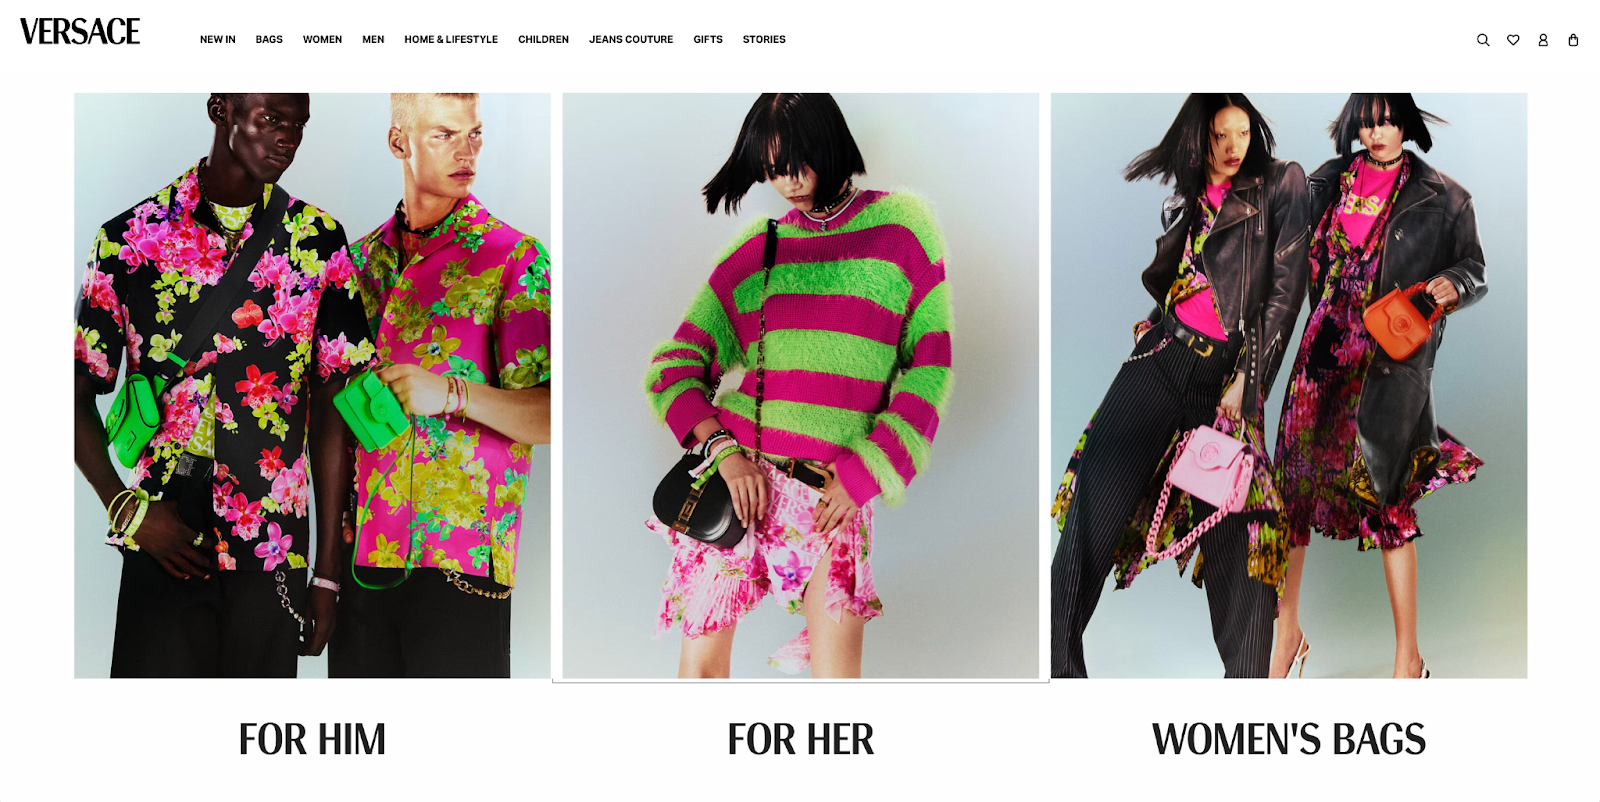 Versace's catalog page with colorful clothes